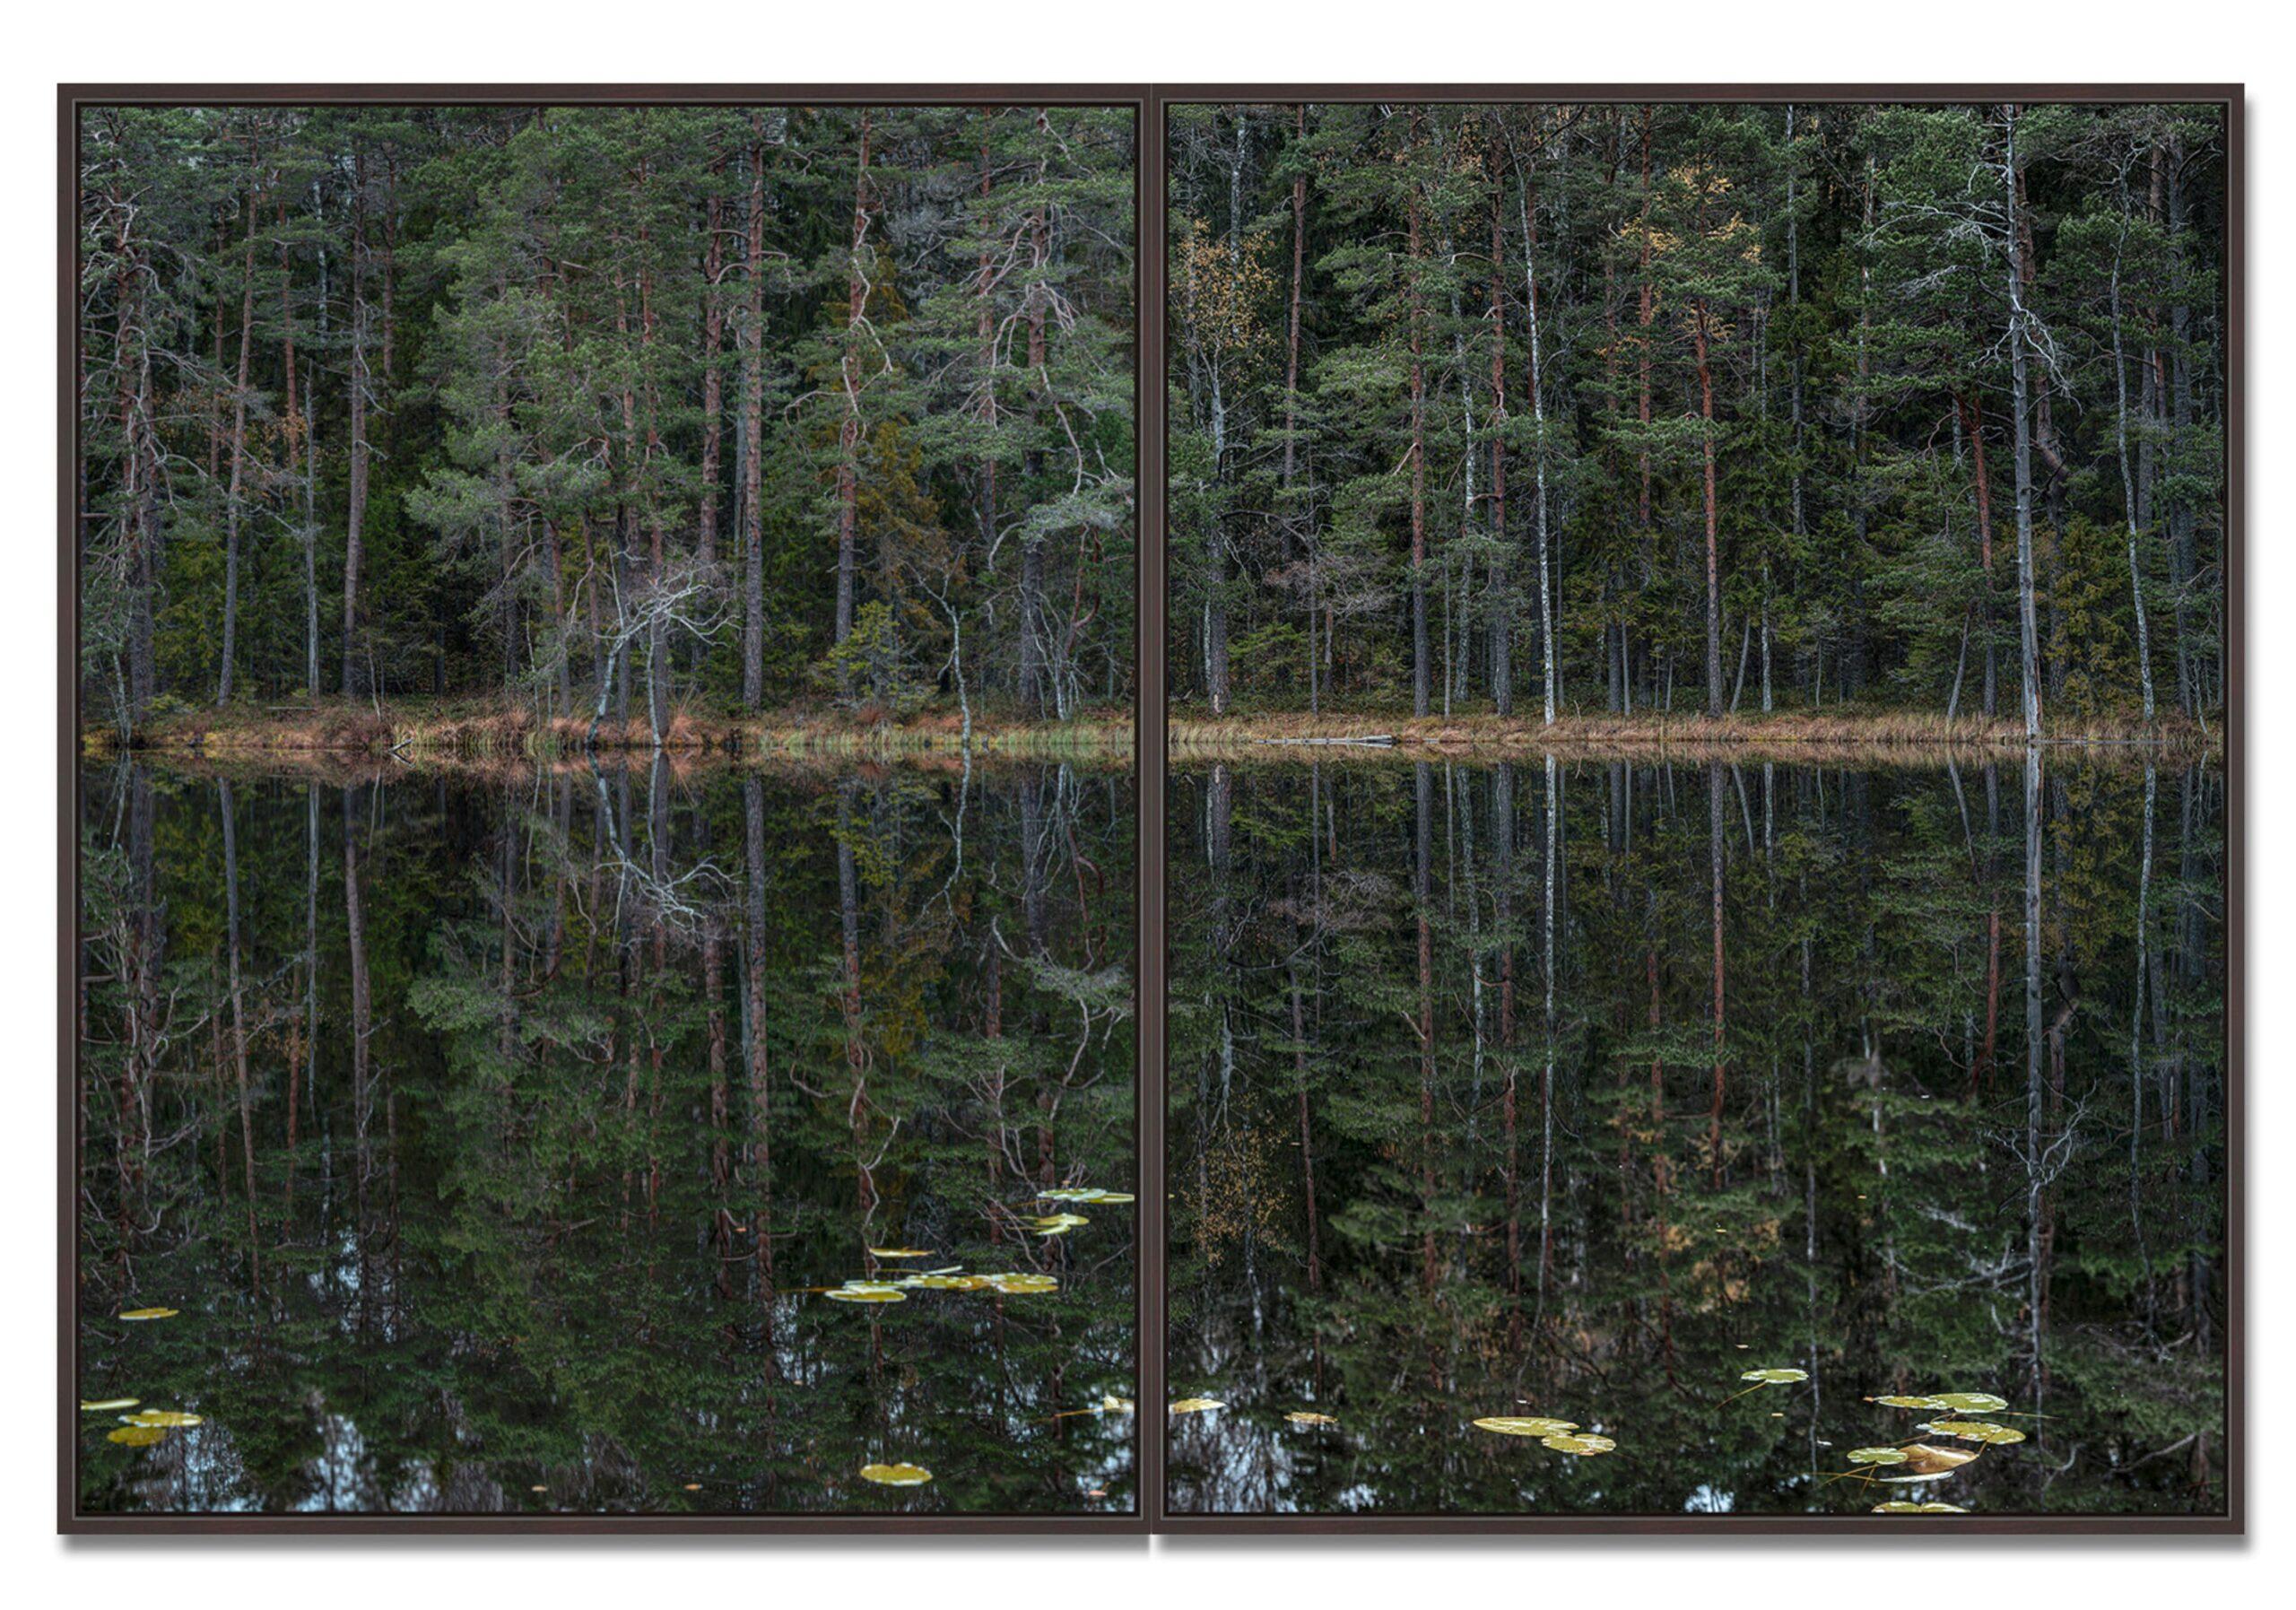 Deep Mirroring Forest 011 by Bernhard Lang - Landscape photography, trees, green For Sale 2